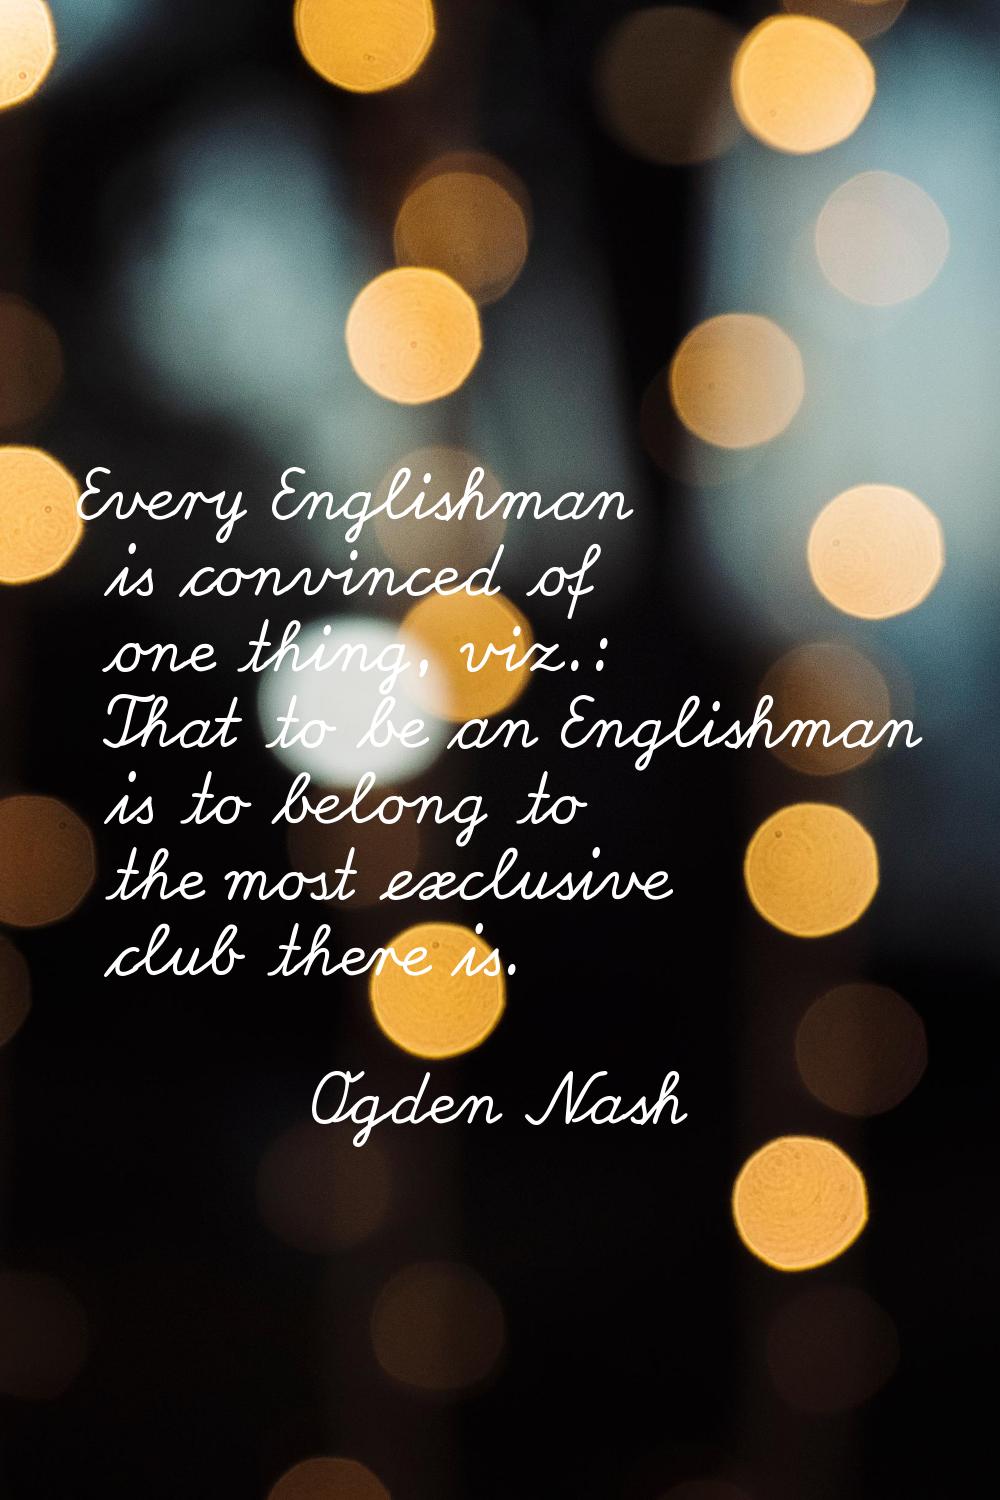 Every Englishman is convinced of one thing, viz.: That to be an Englishman is to belong to the most